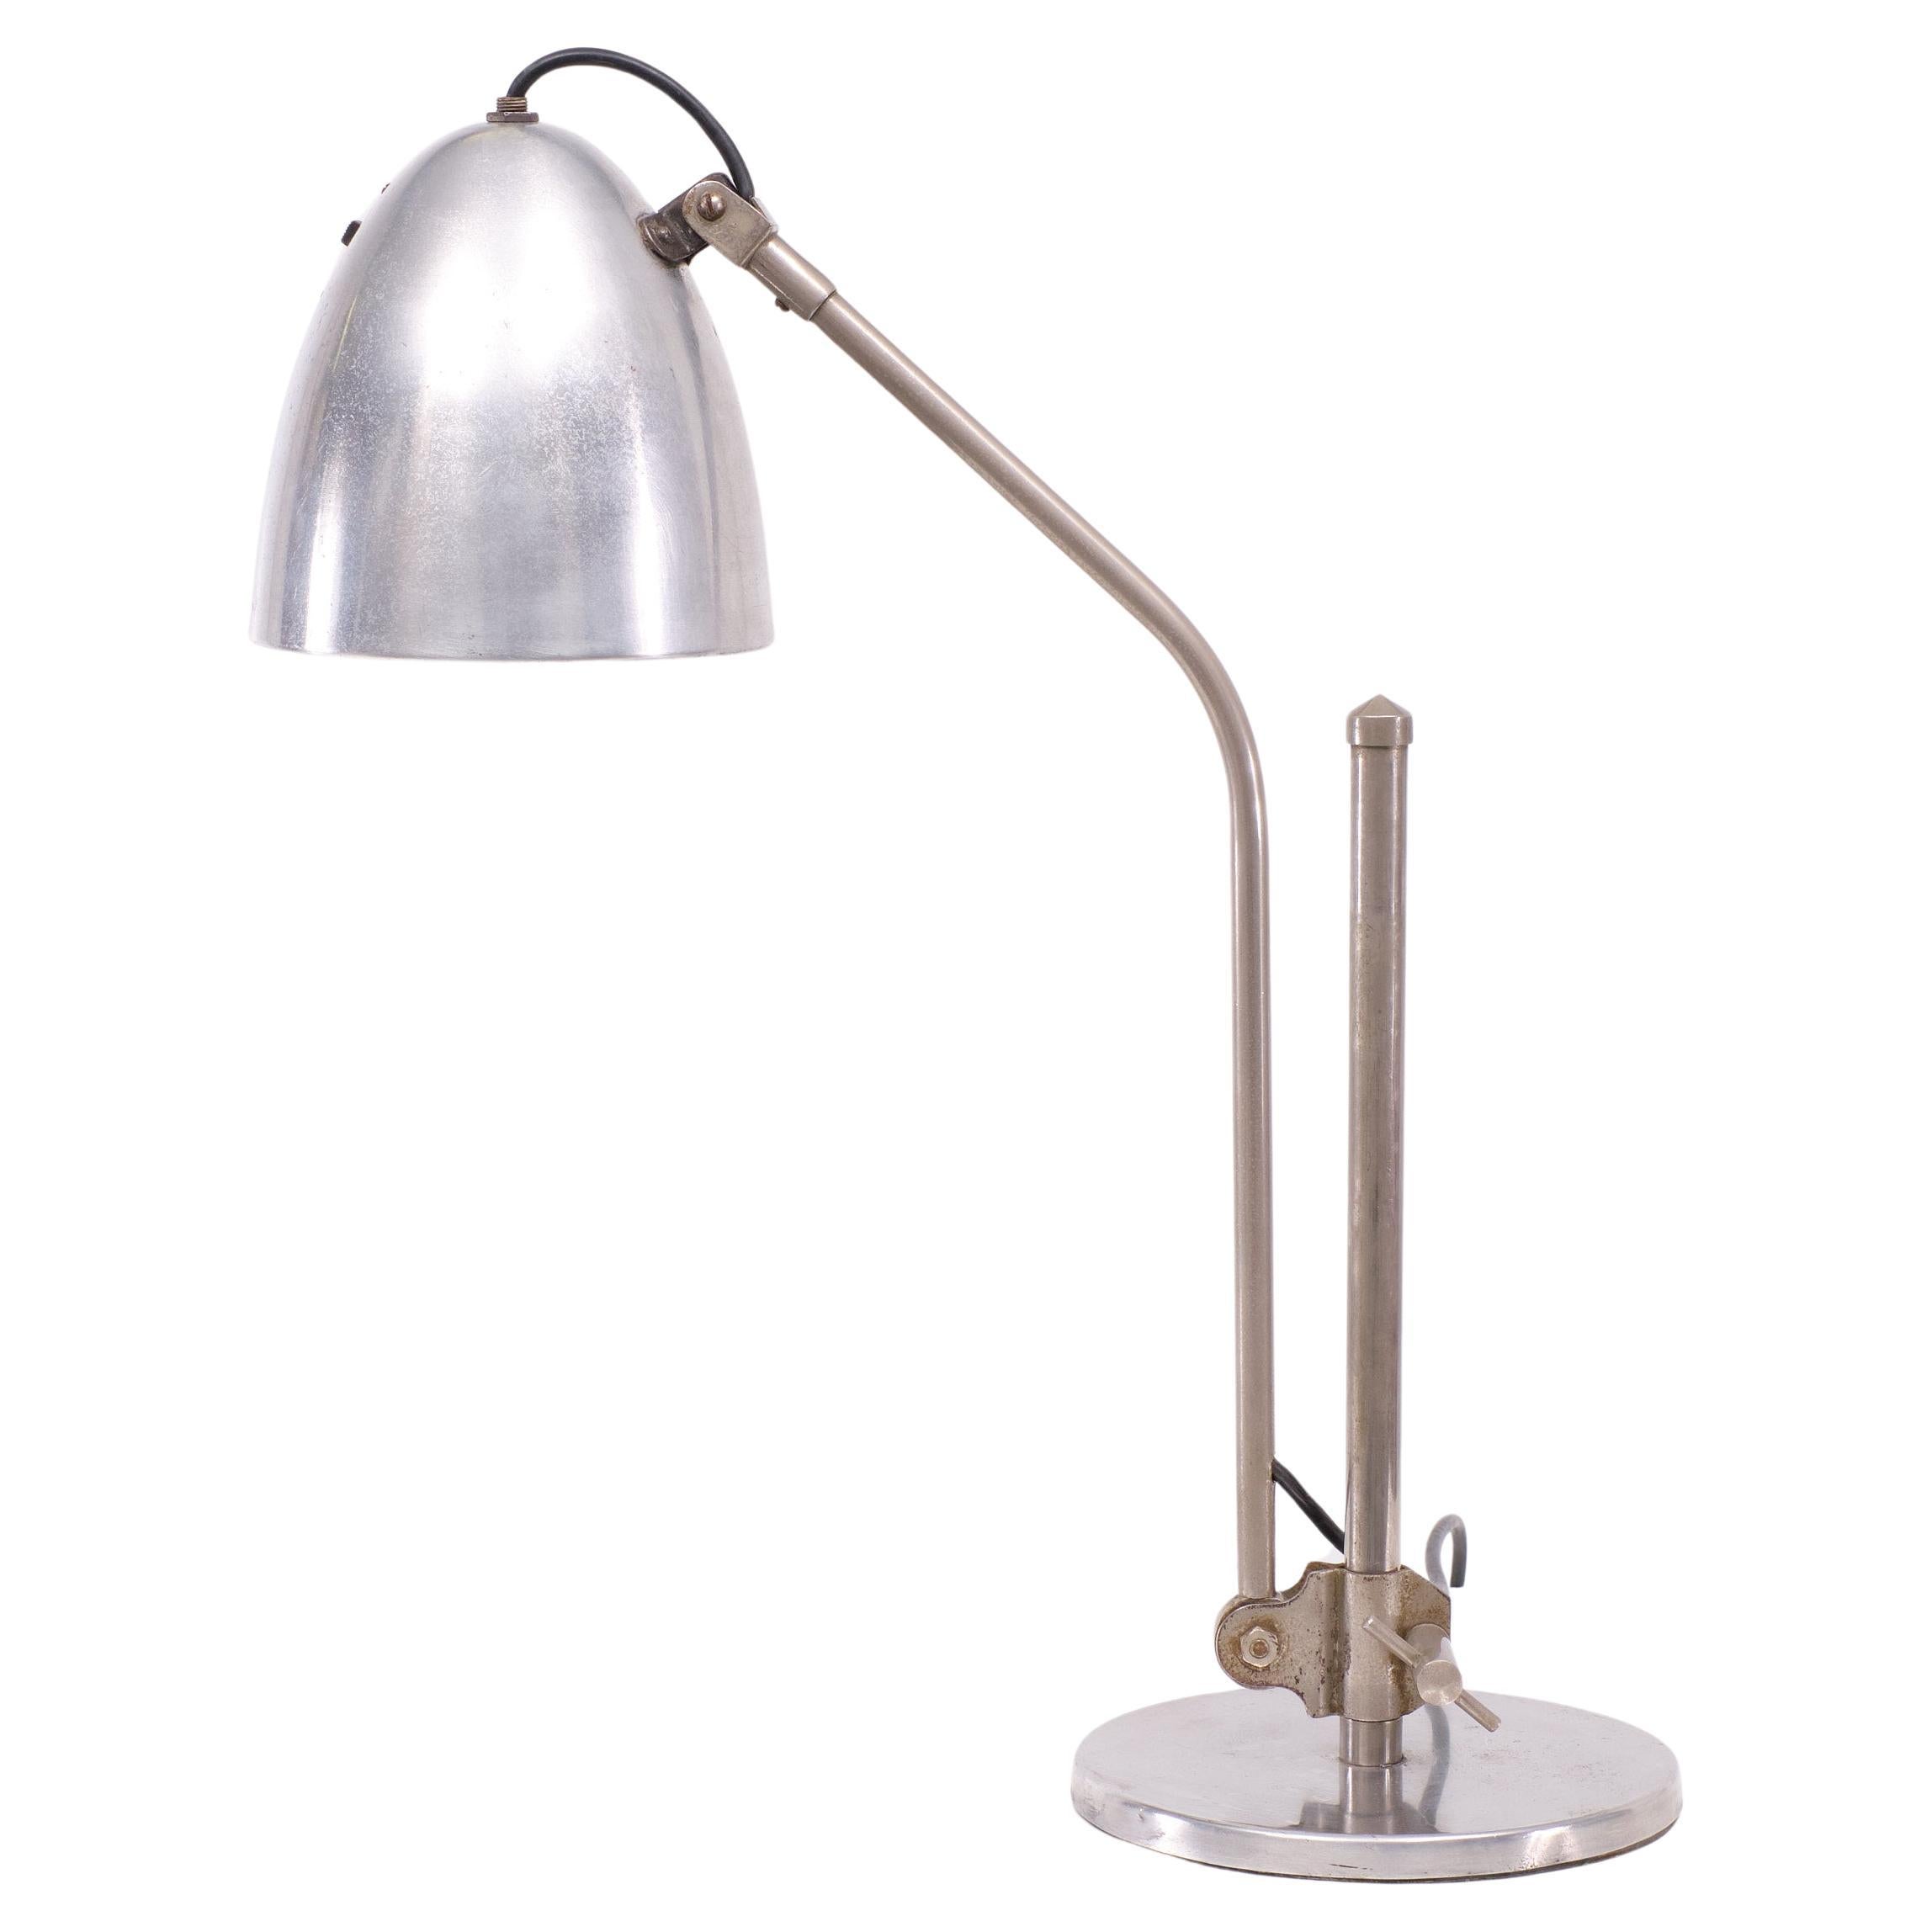 Christian Dell  Bauhaus Desk lamp 1930s Germany  In Good Condition For Sale In Den Haag, NL